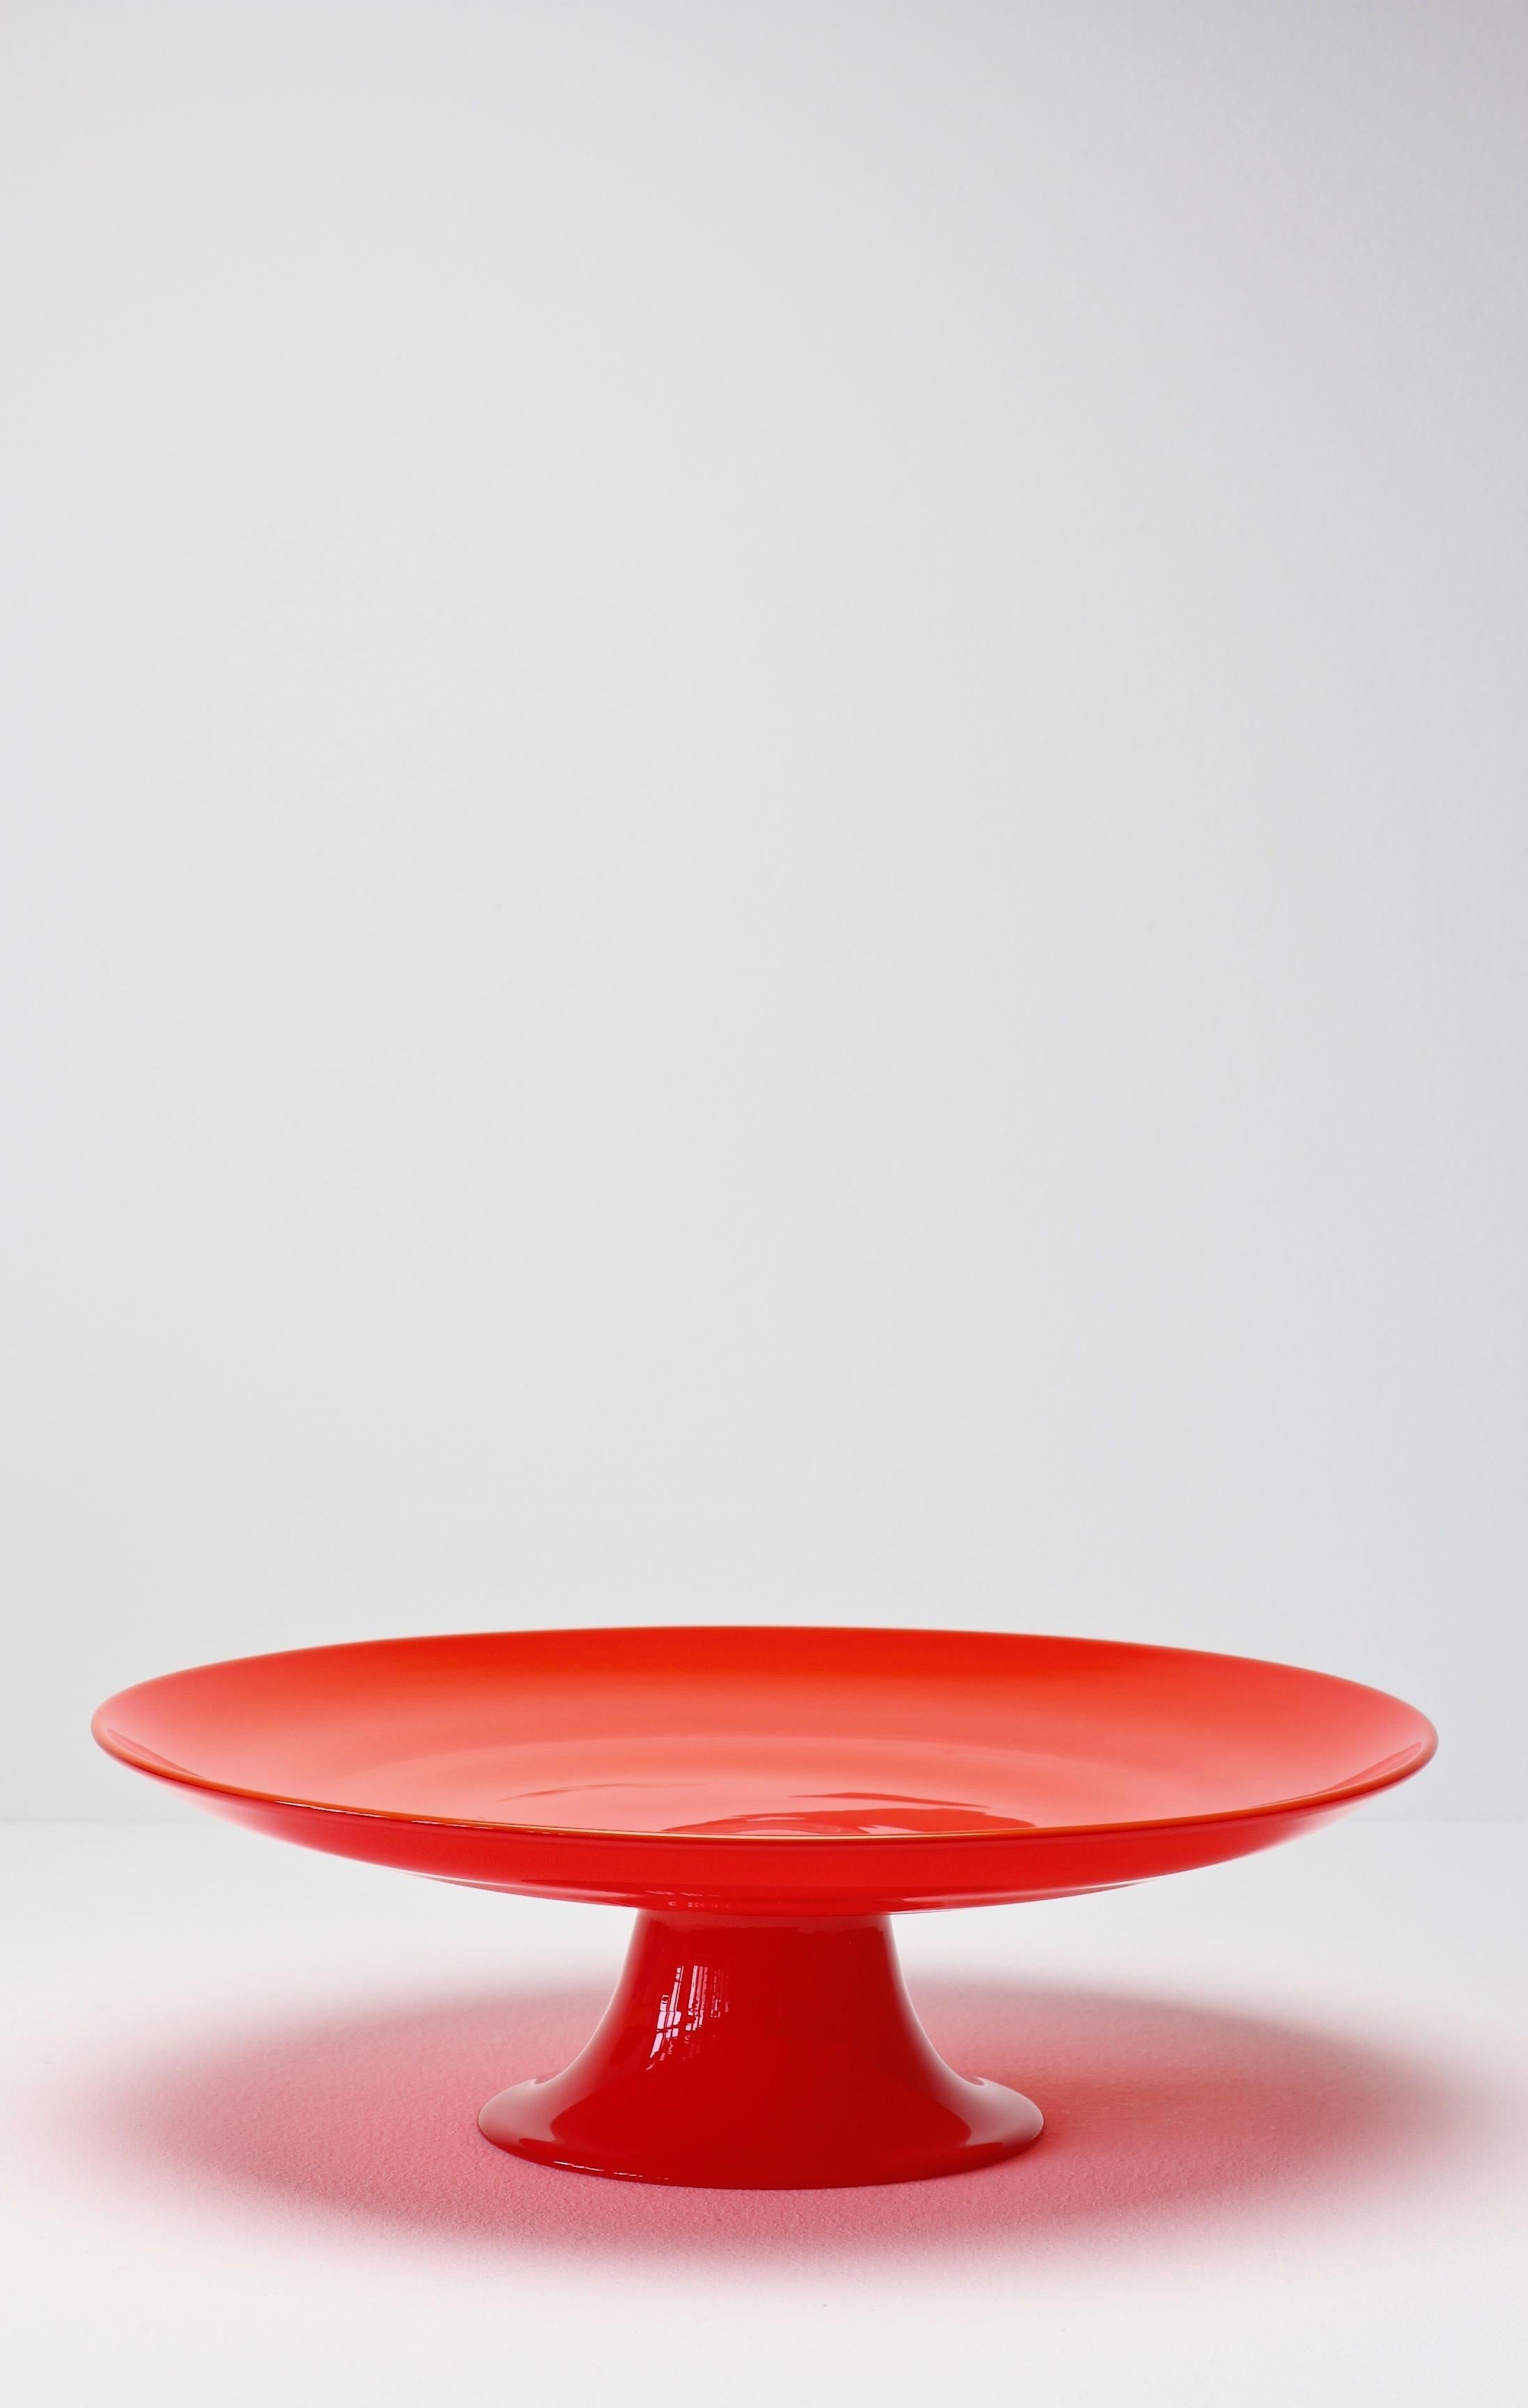 Rare Murano glass cake stand or serving plate by Cenedese circa 1970-1990. The design is likely to be by either Antonio Da Ros or Ermanno Nason. Wonderful color/colour of bright red and simplistic yet elegant form. Fun to dine with vibrant vintage